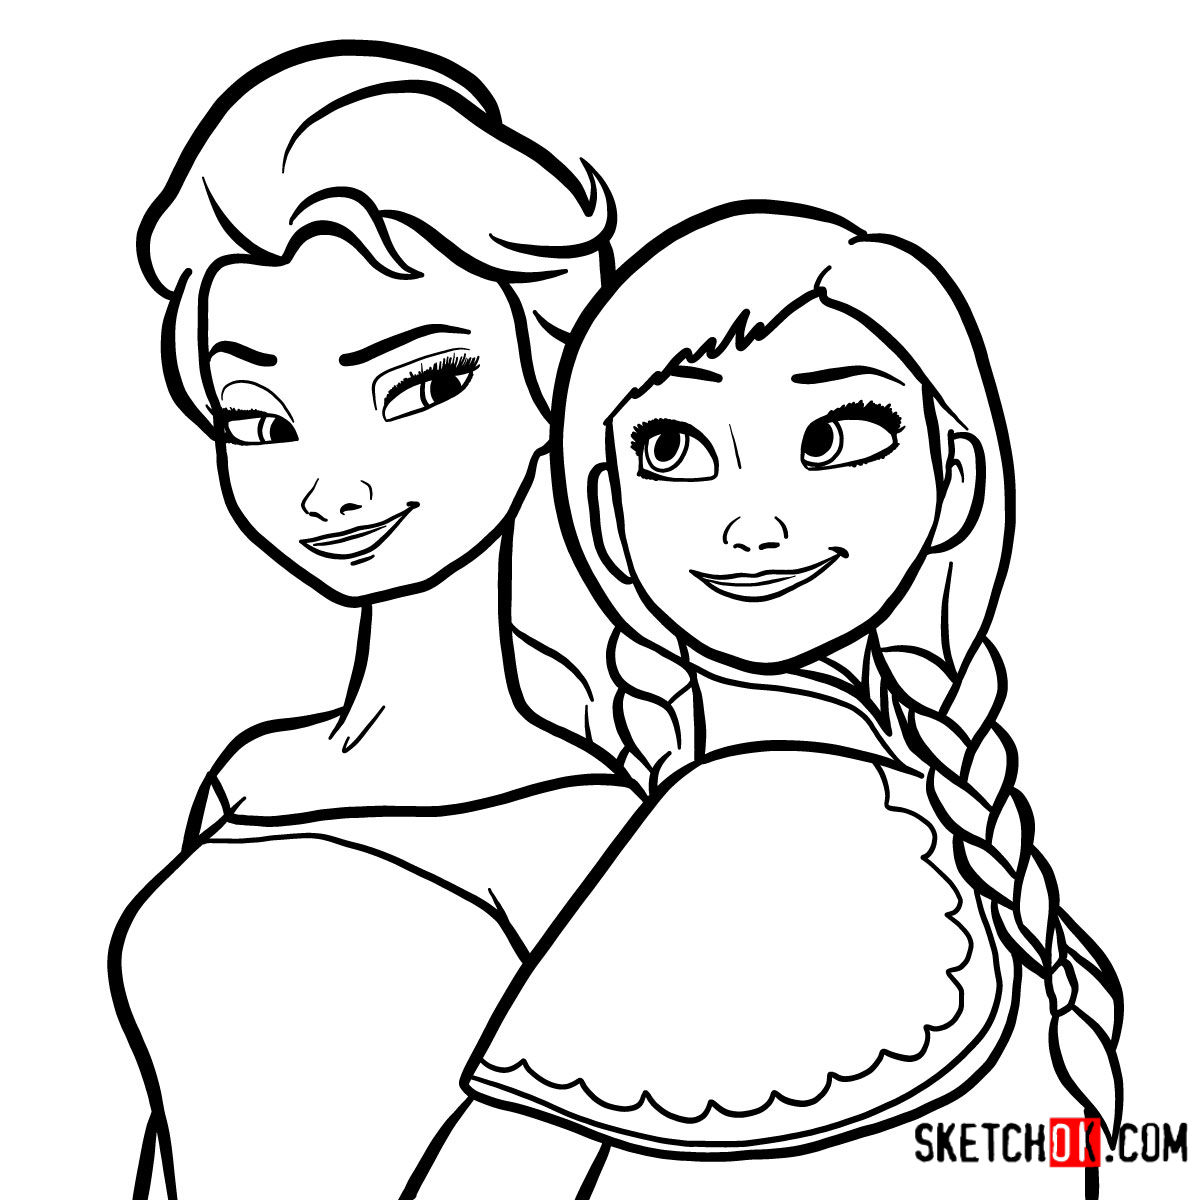 How to draw Elsa and Anna together | Frozen